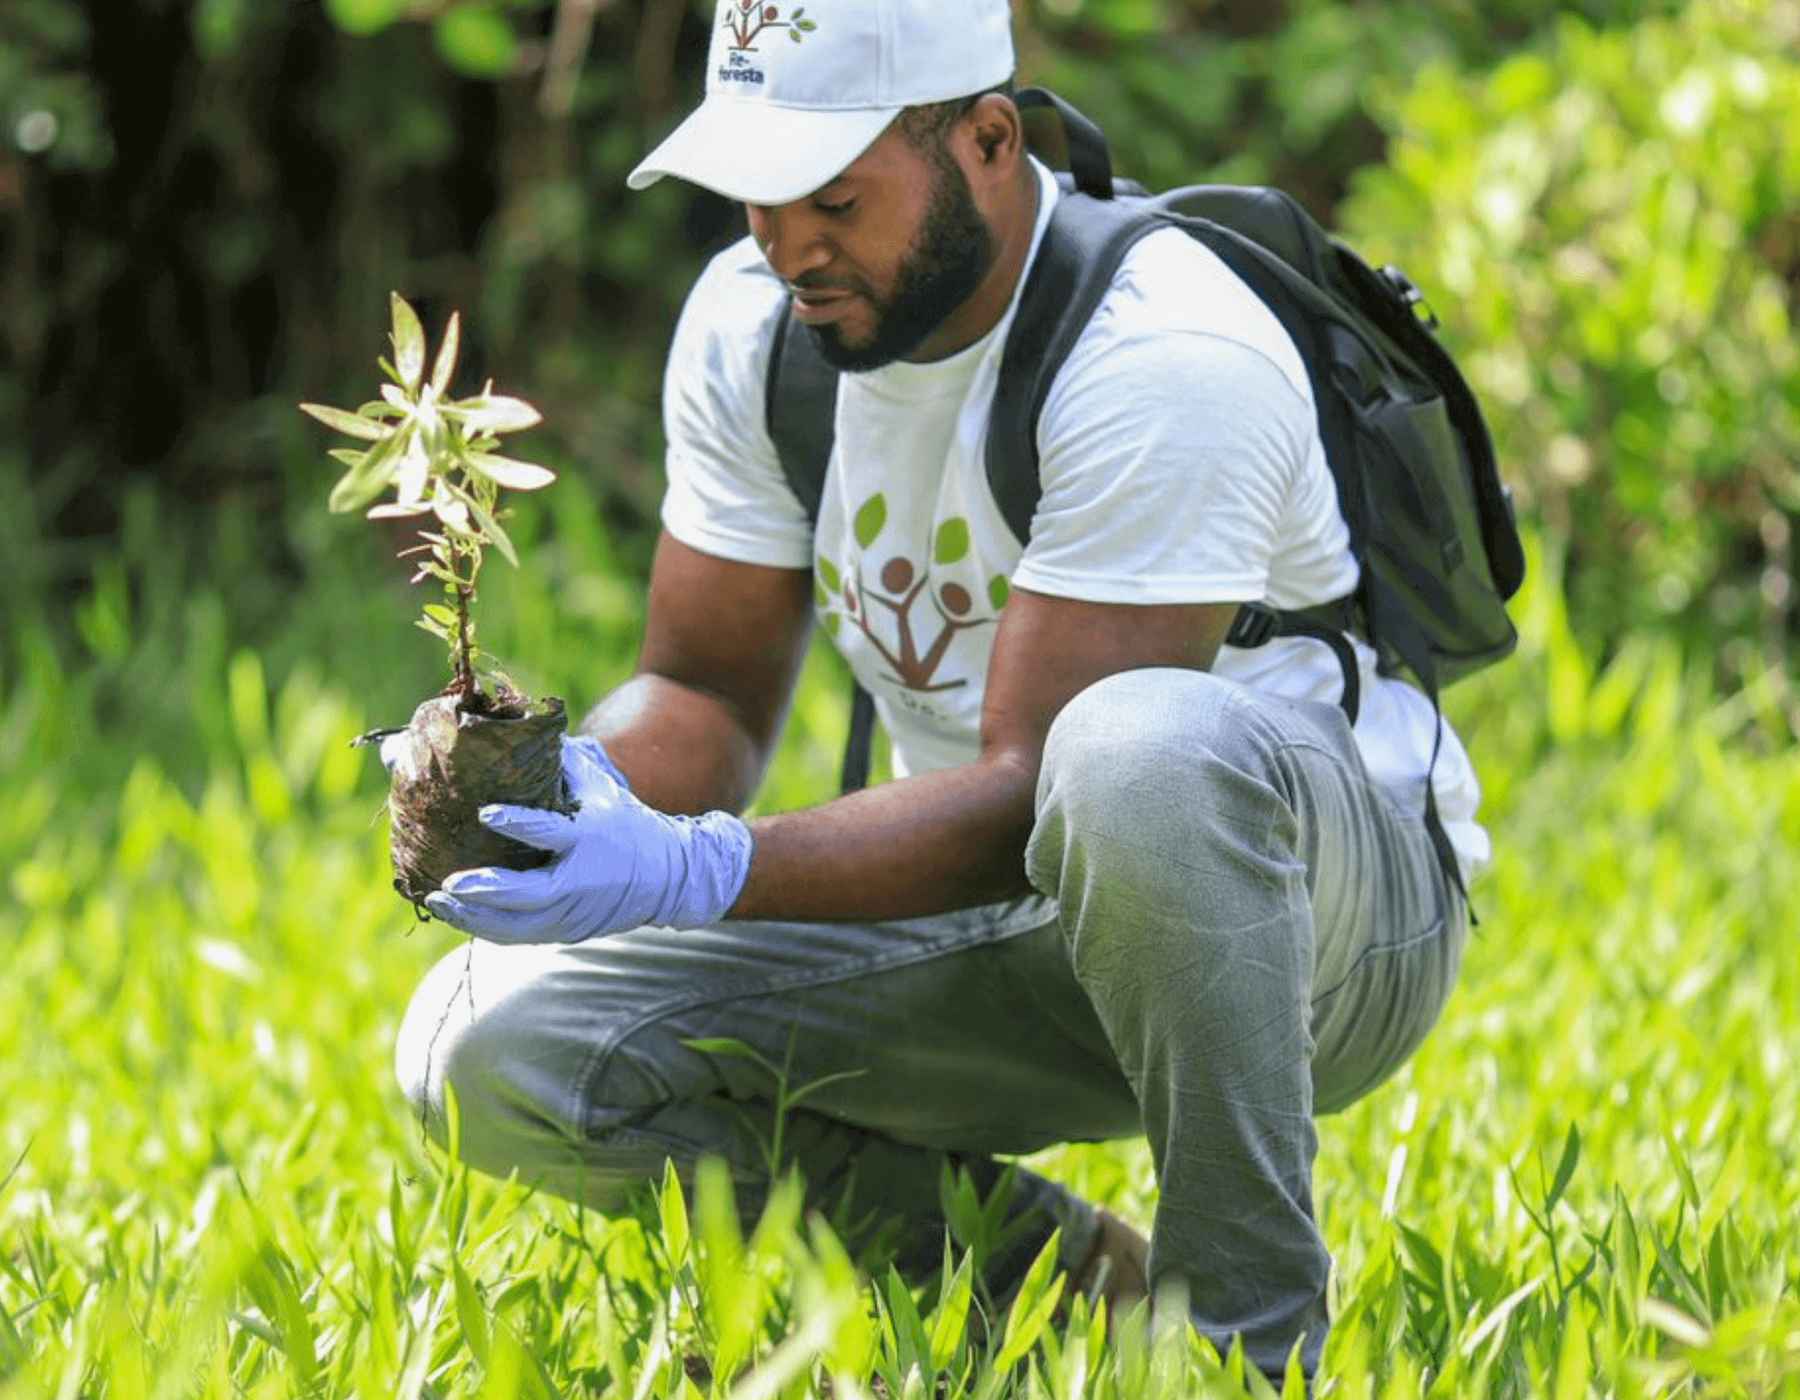 A Gildan employee in Nicaragua is holding a tree seedling that he is about to plant.